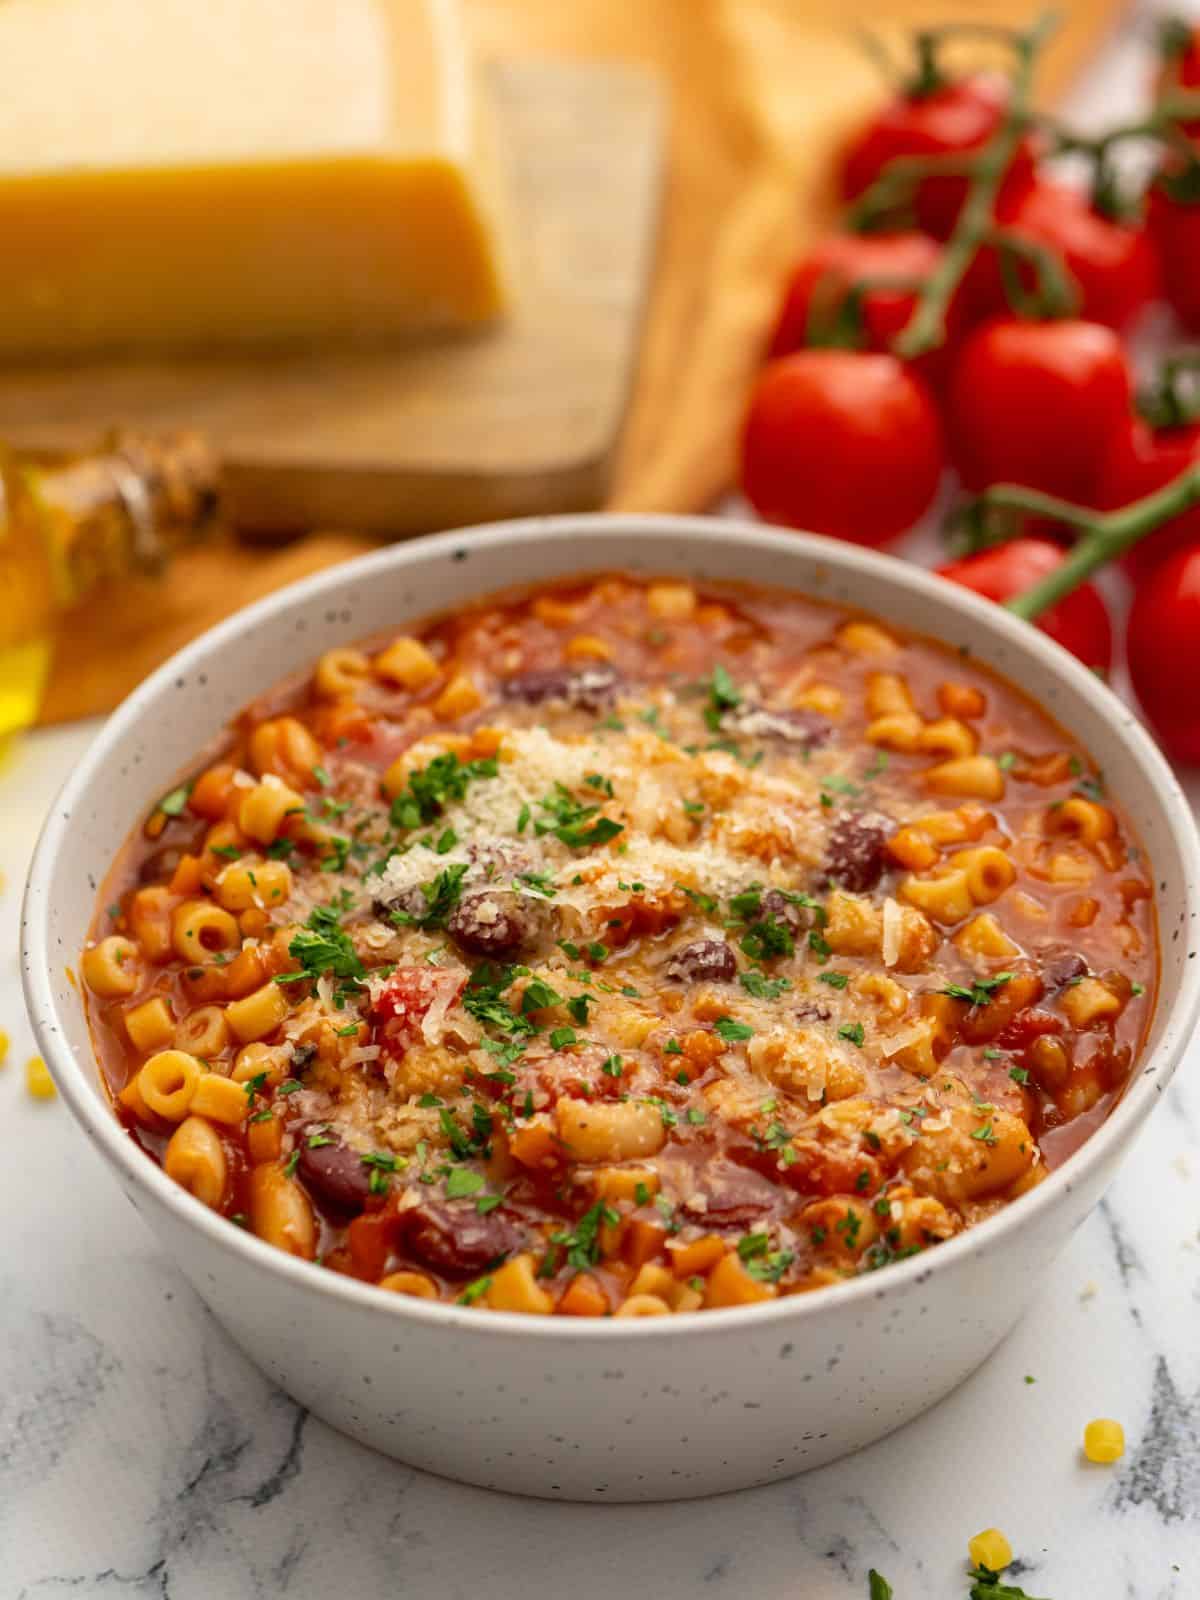 Bowl of pasta fagioli topped with parmesan cheese.